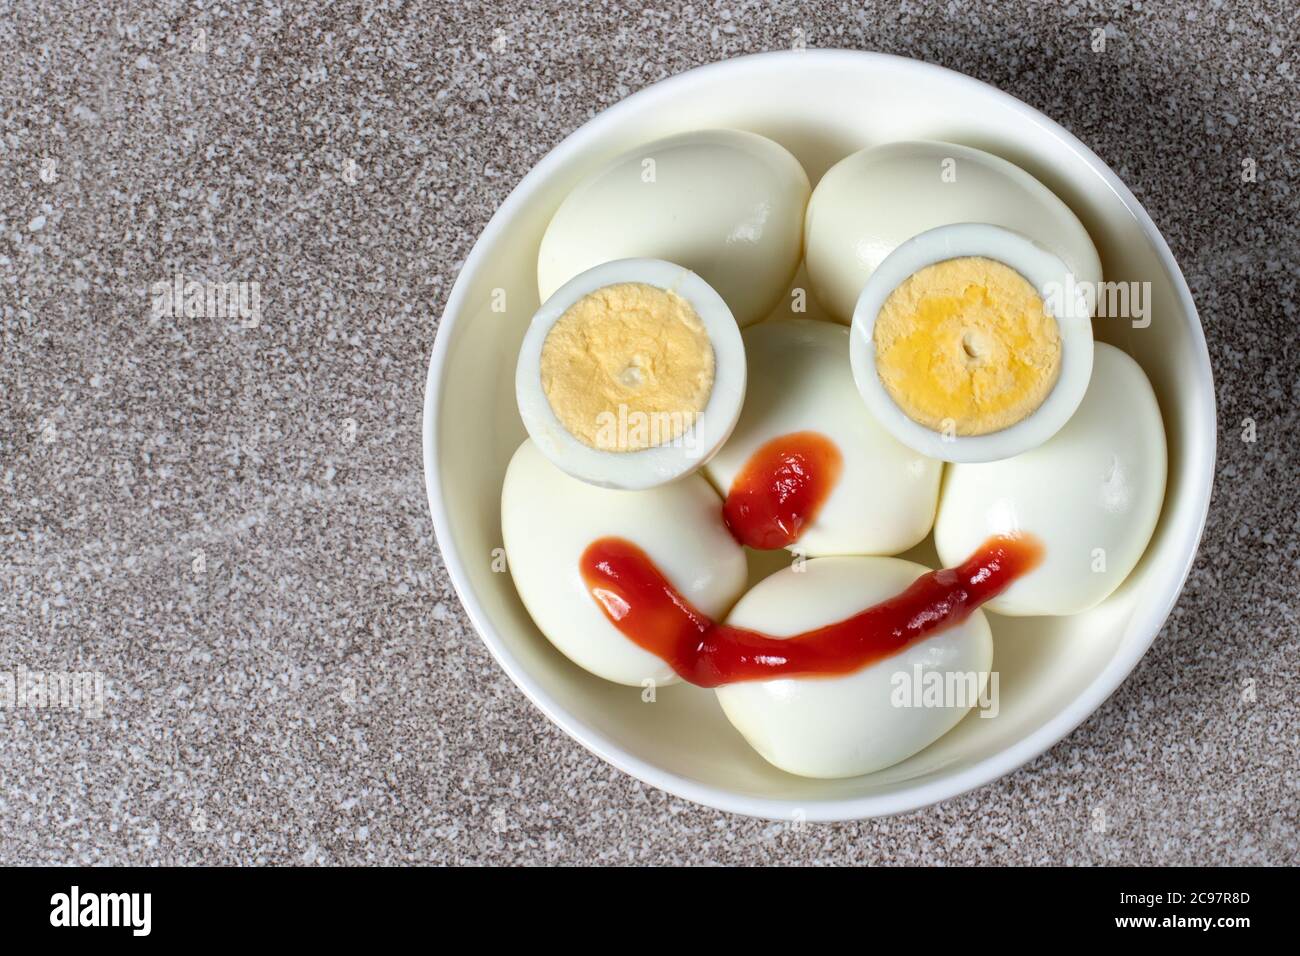 Merry fried eggs. Boiled eggs are smiling. Stock Photo